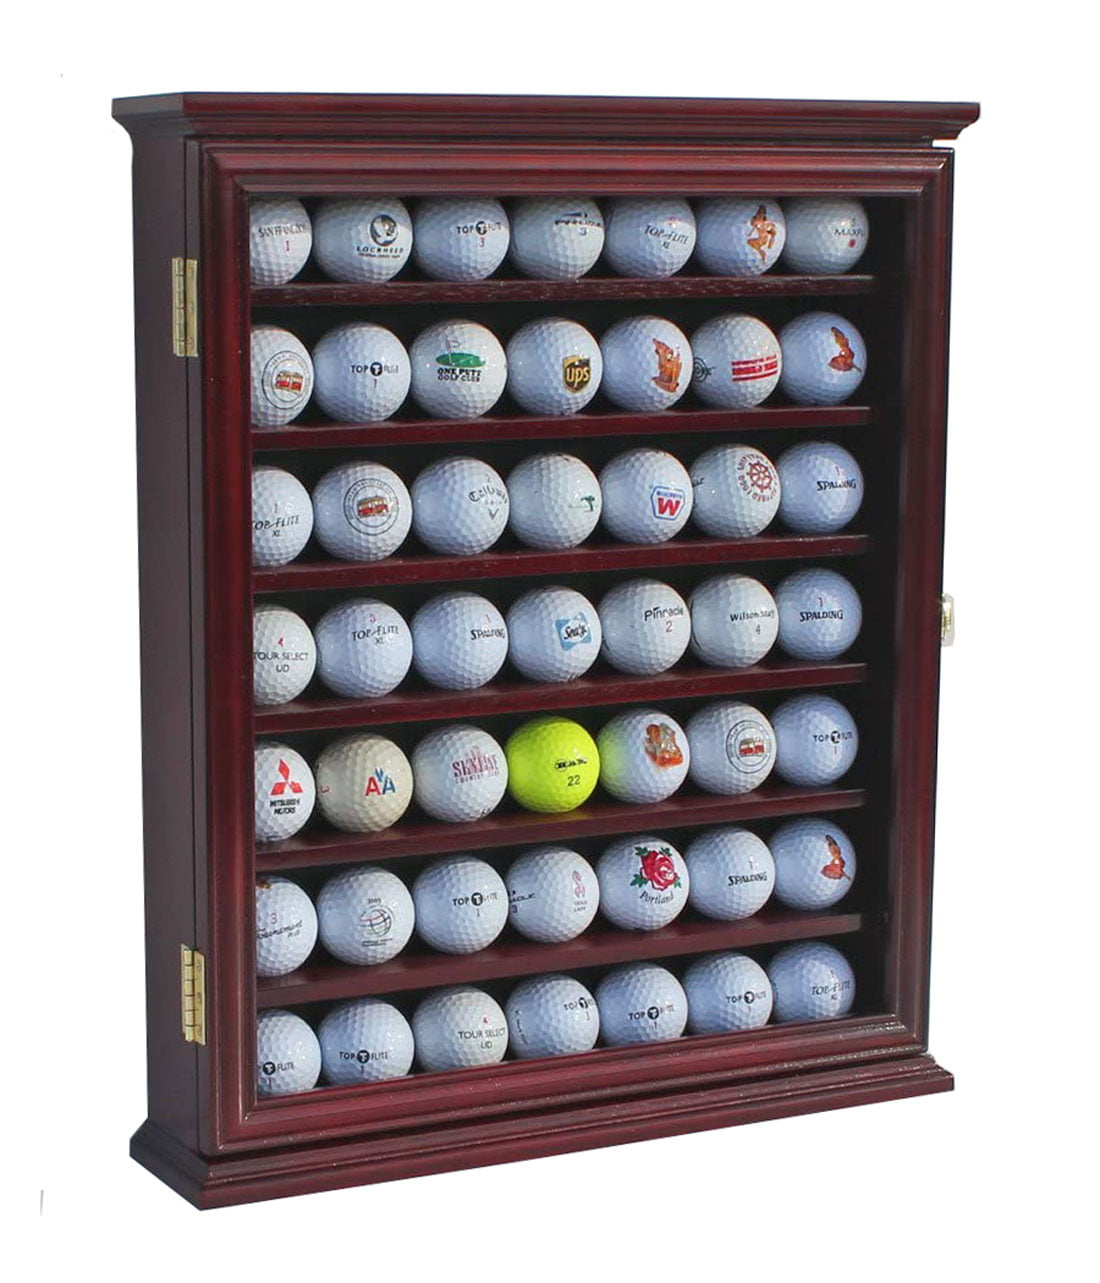 Custom Imprinted Golf Ball Holder Case With 3 Balls And Tee